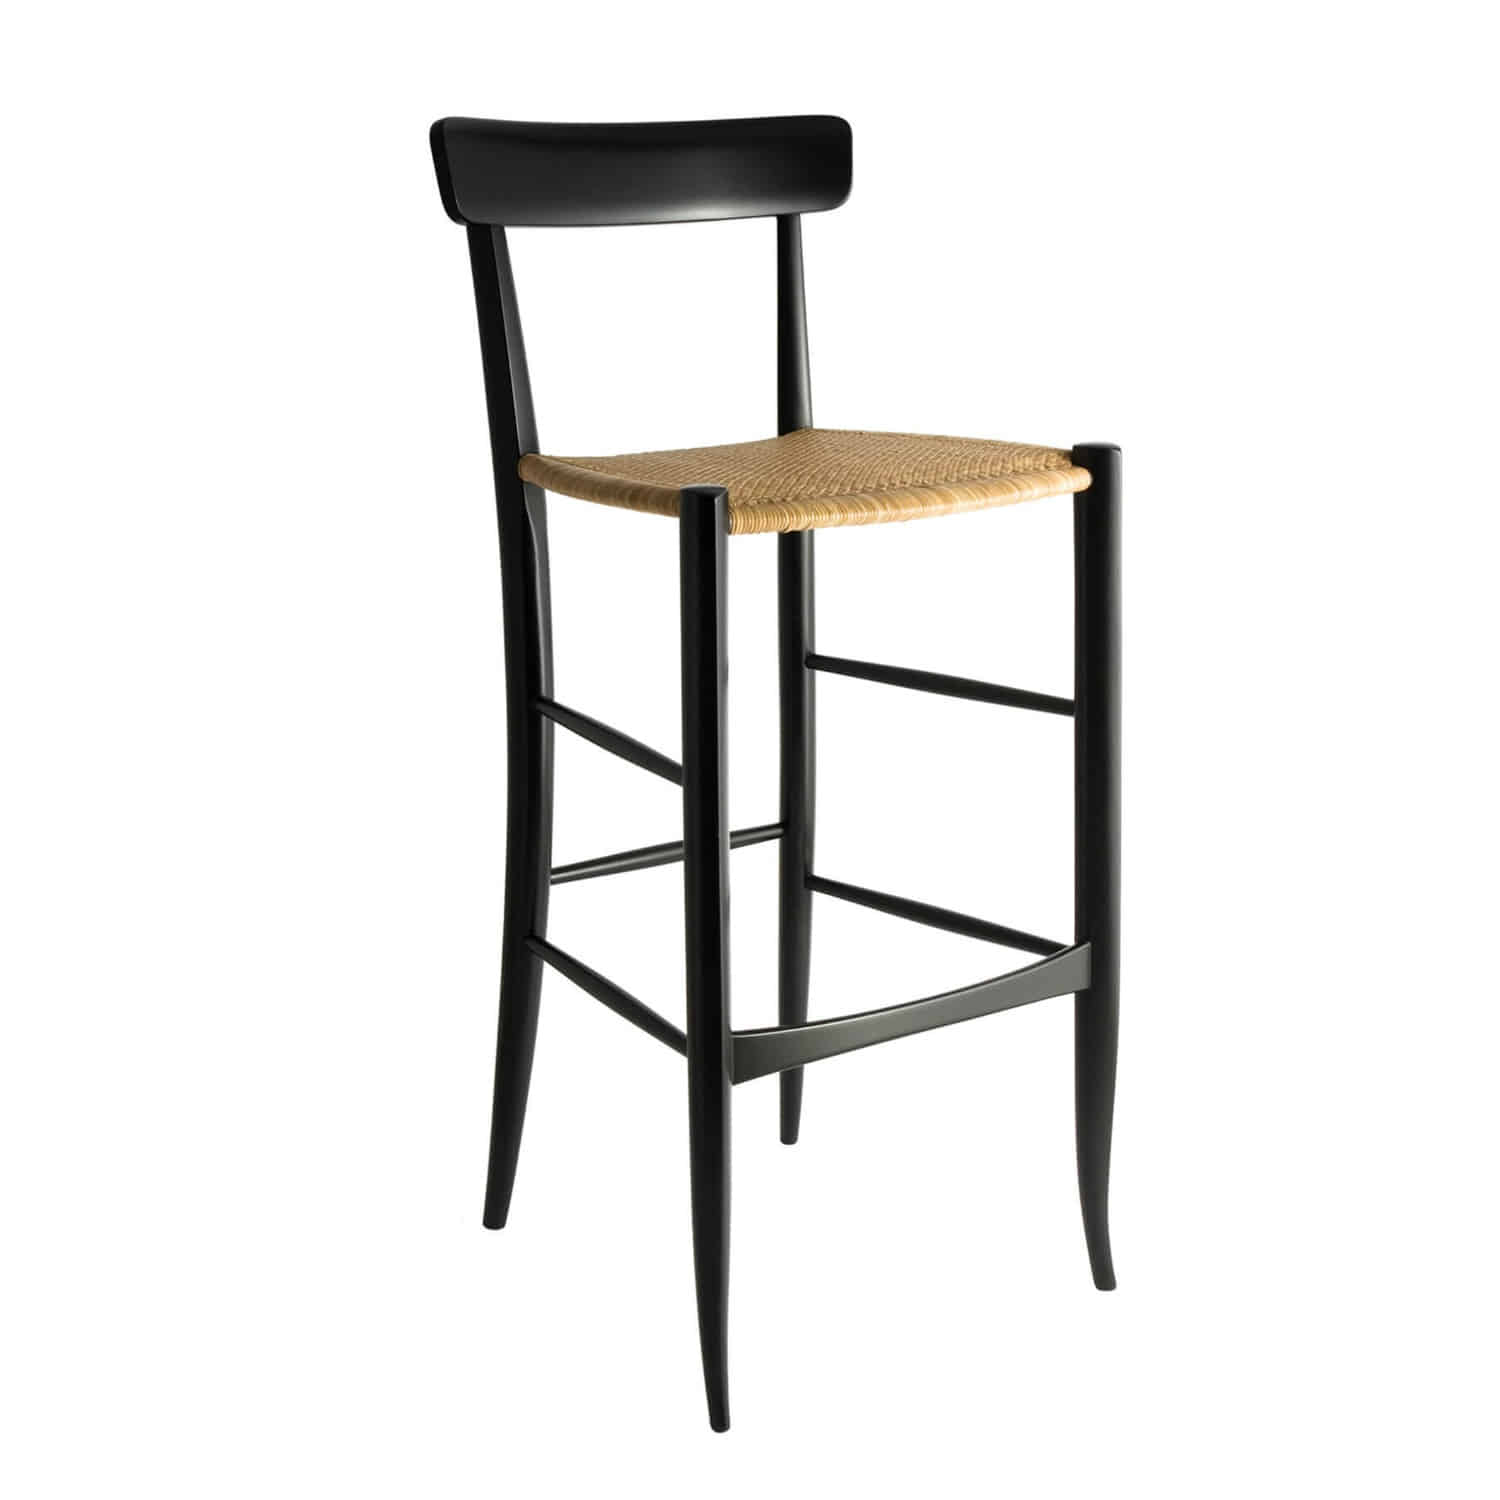 The Campanino ‘900 Stool With Backrest